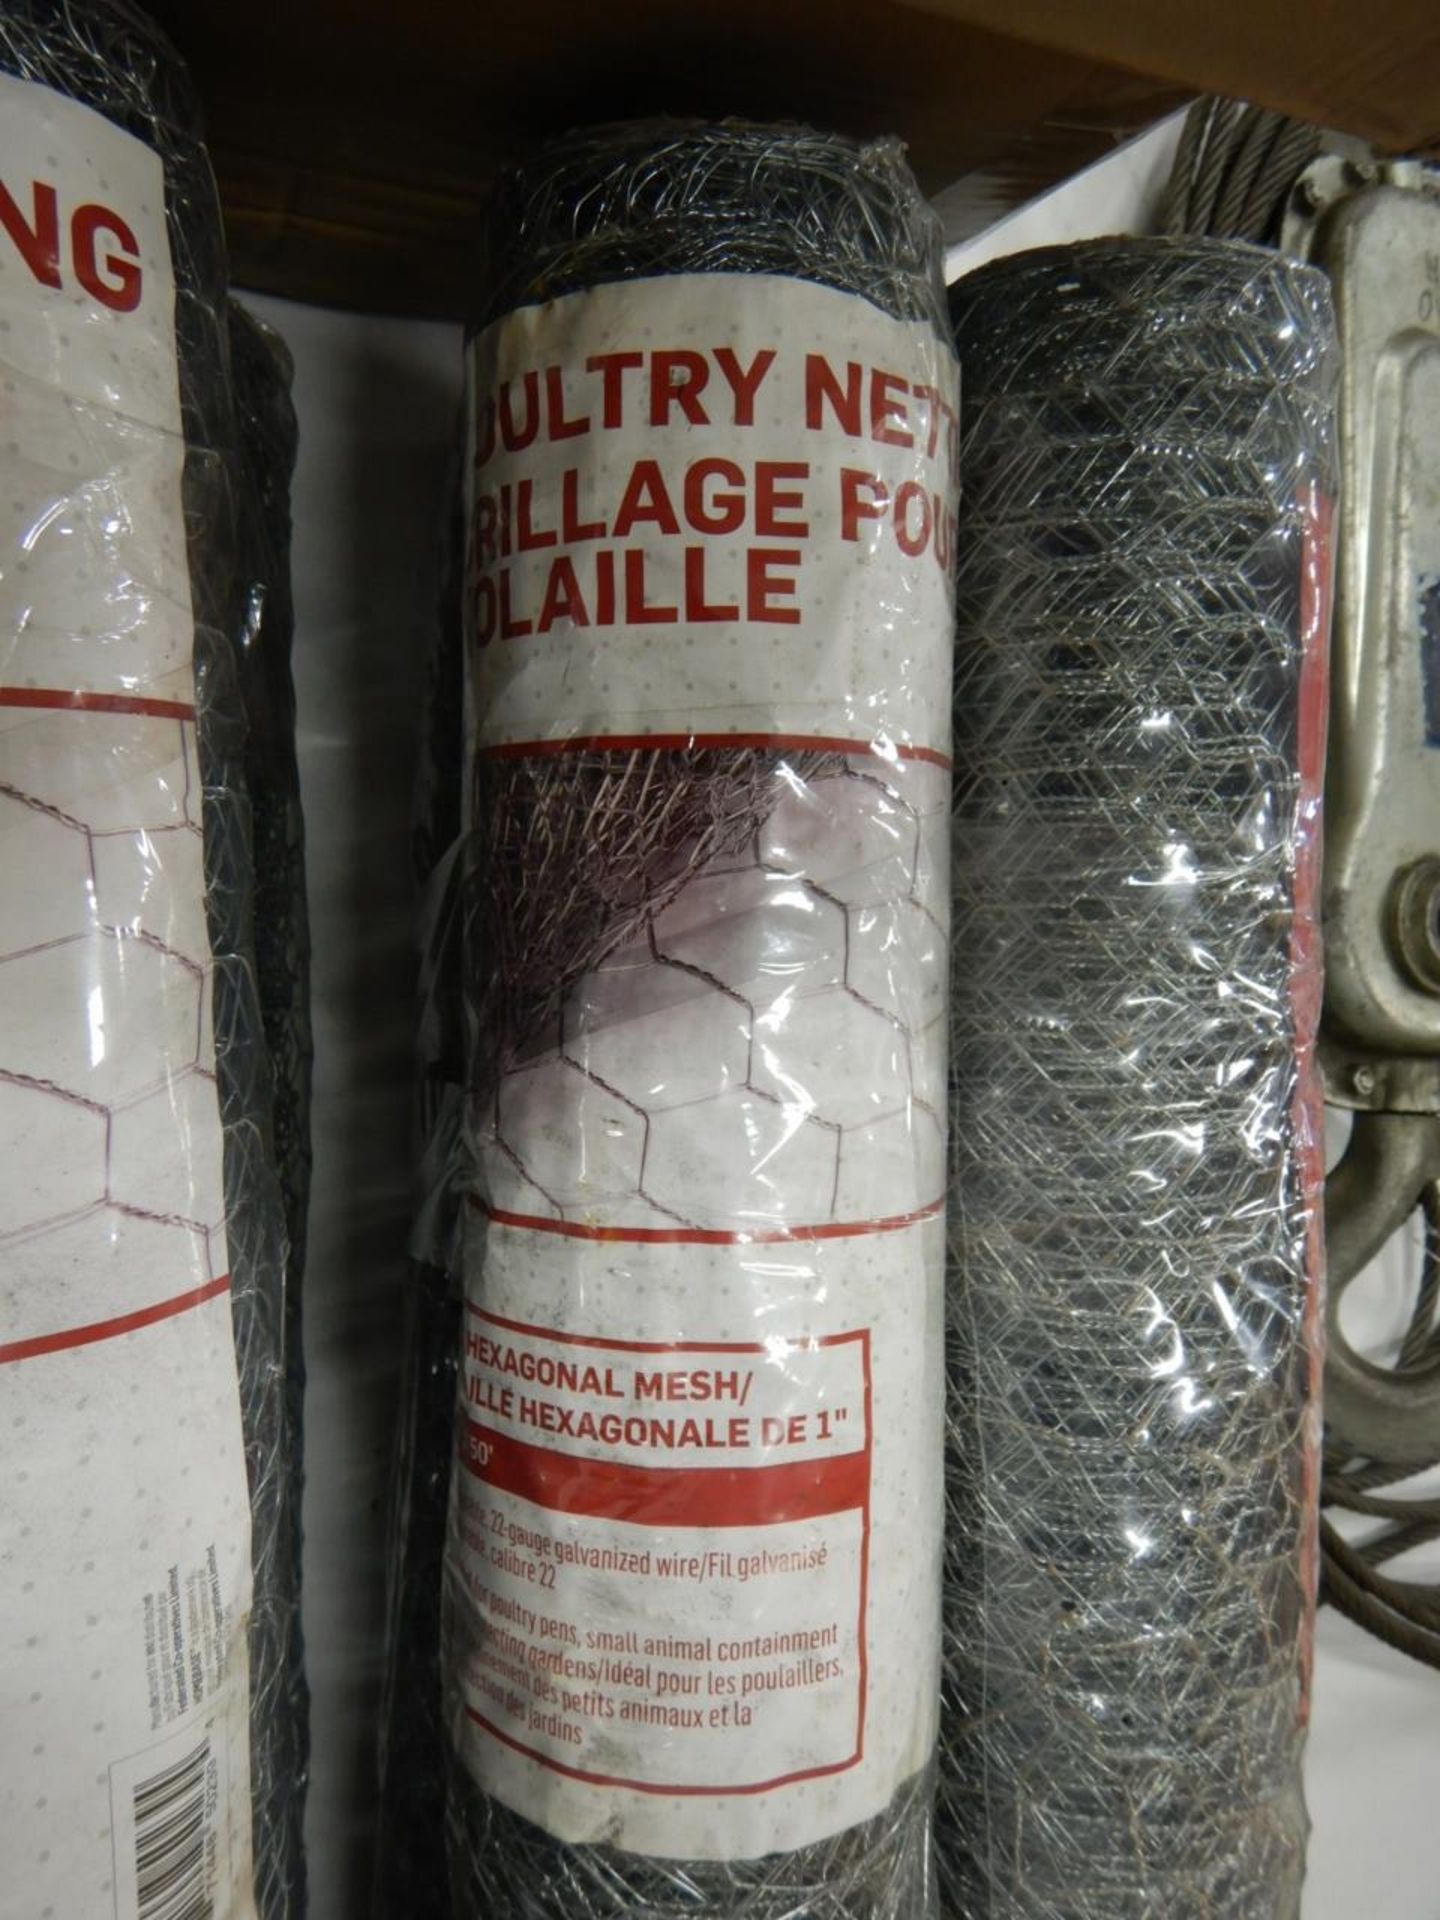 4-ROLLS OF FCL 24" METAL POULTRY NETTING 1"X22GA.X48"X50FT (SOME ROLLS HAVE WATER DAMAGE) - Image 2 of 2